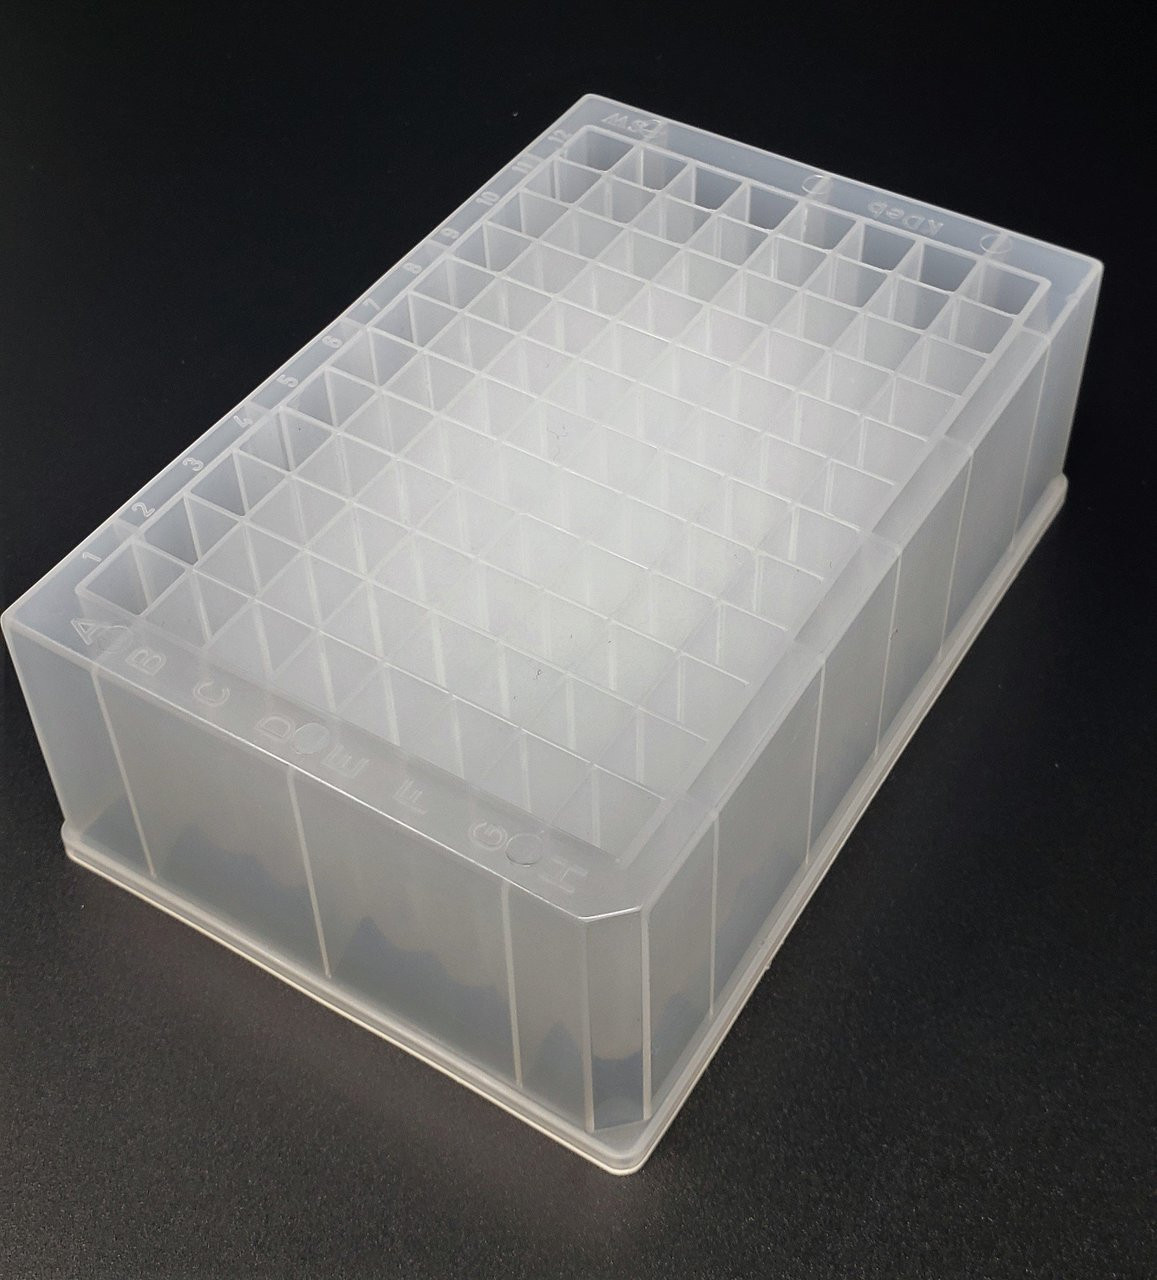 KDeb 2 ml 96 Deep Well Microplate (Square)